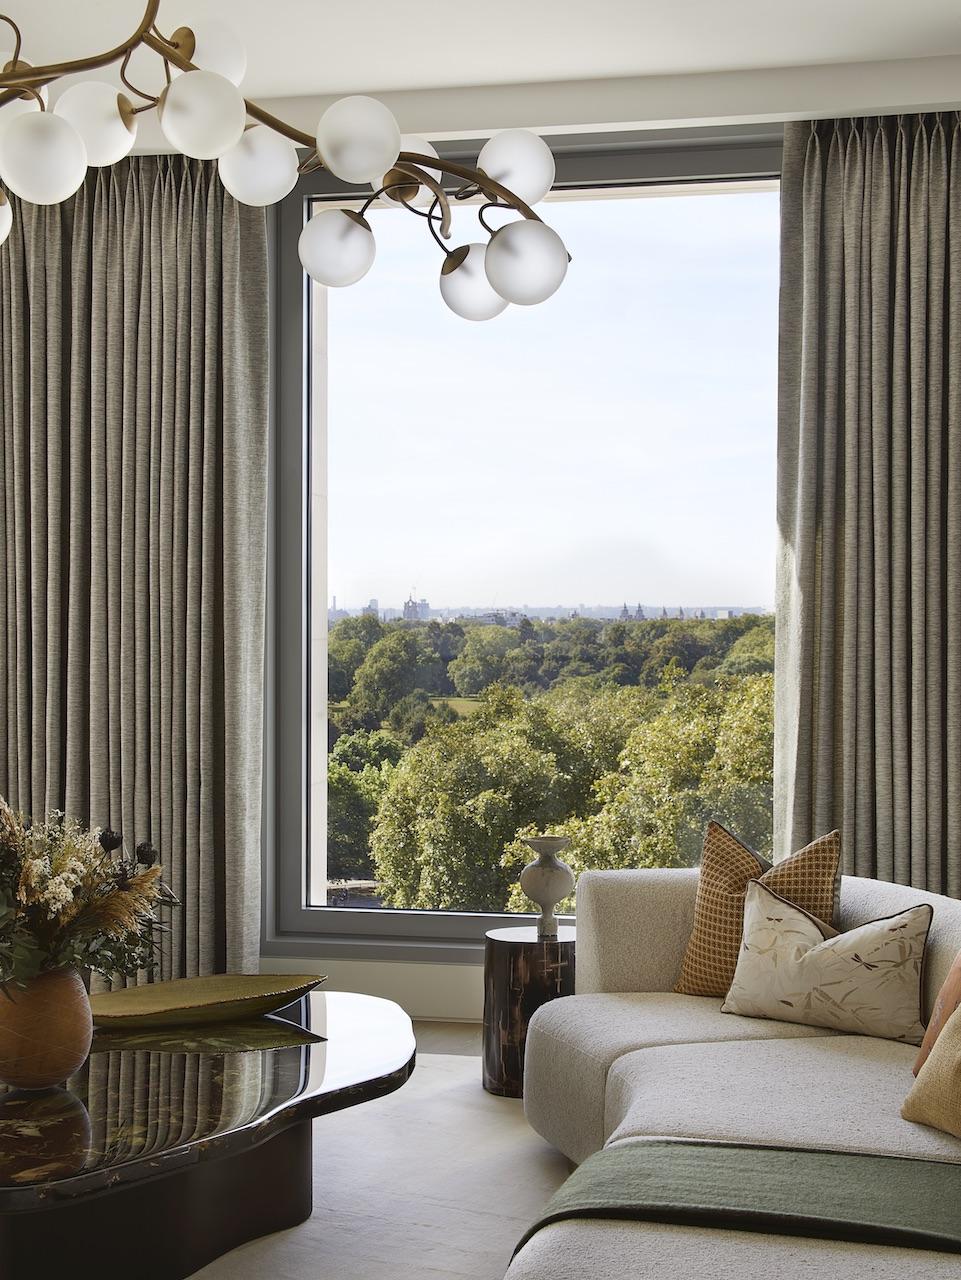 Overseas Property: The Bryanston in Central London